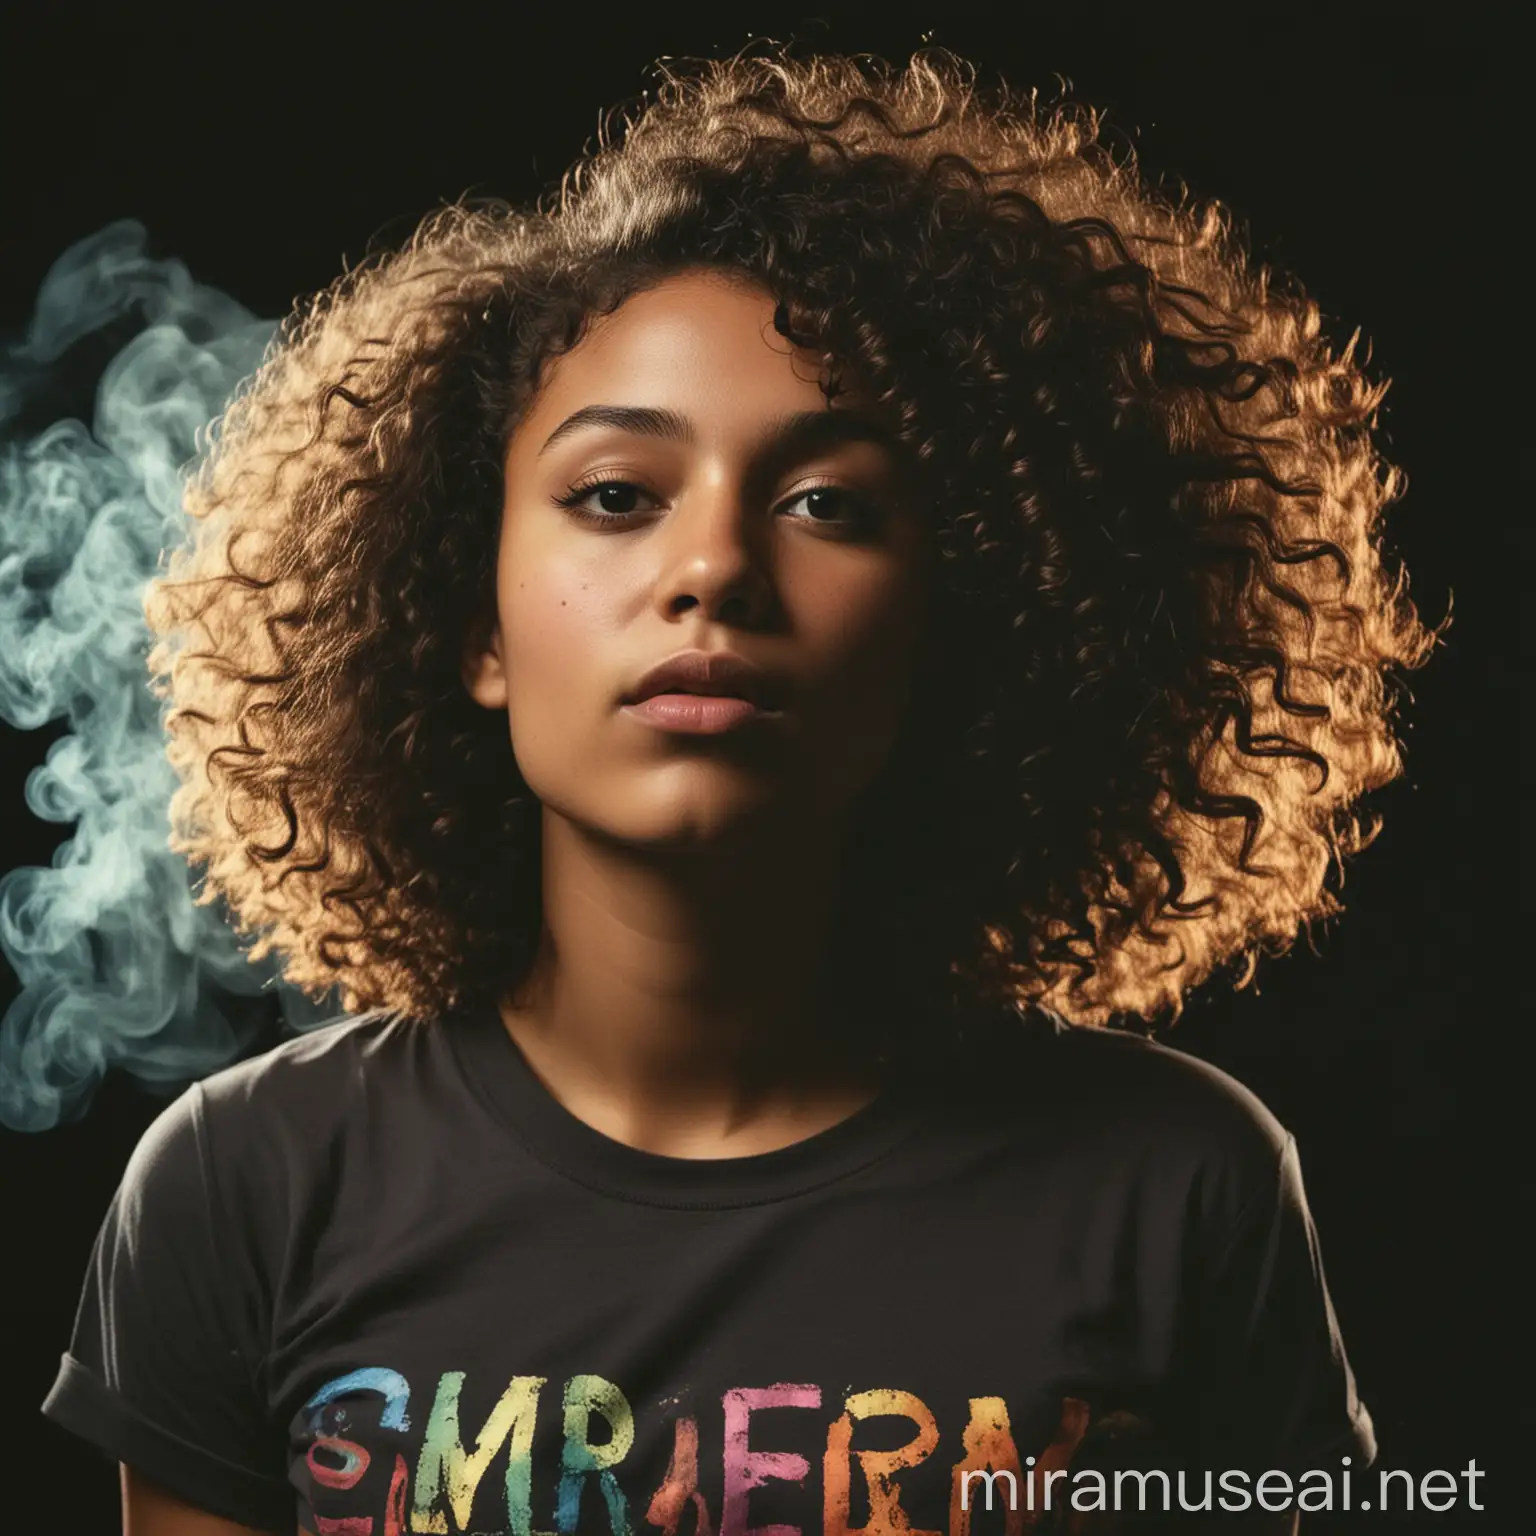 CurlyHaired DarkSkinned Woman in Noir Style with Colorful Smoke